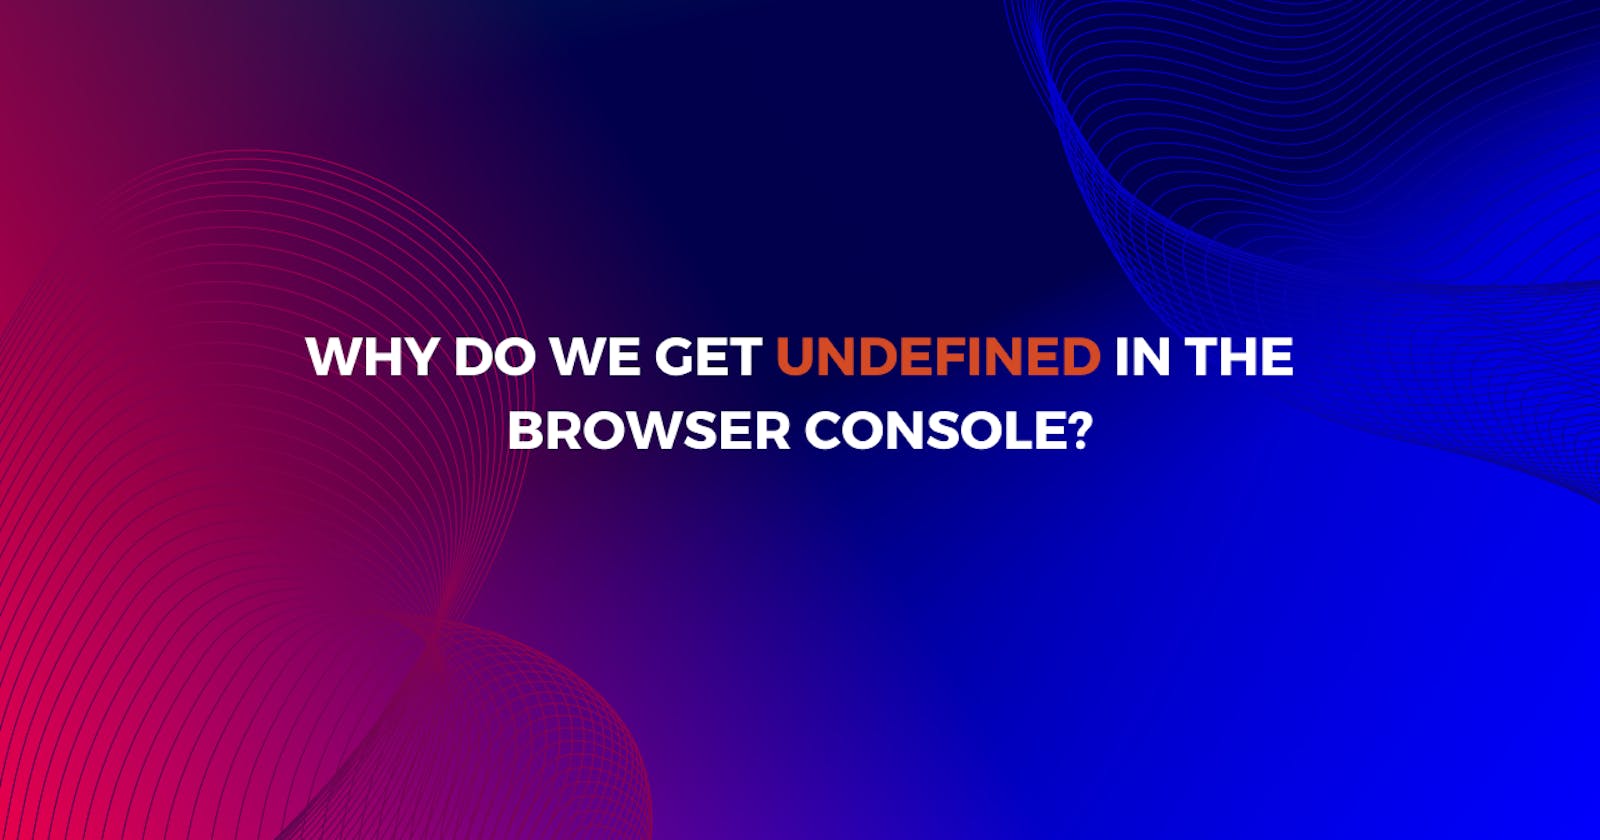 Why do we get undefined in the browser console?